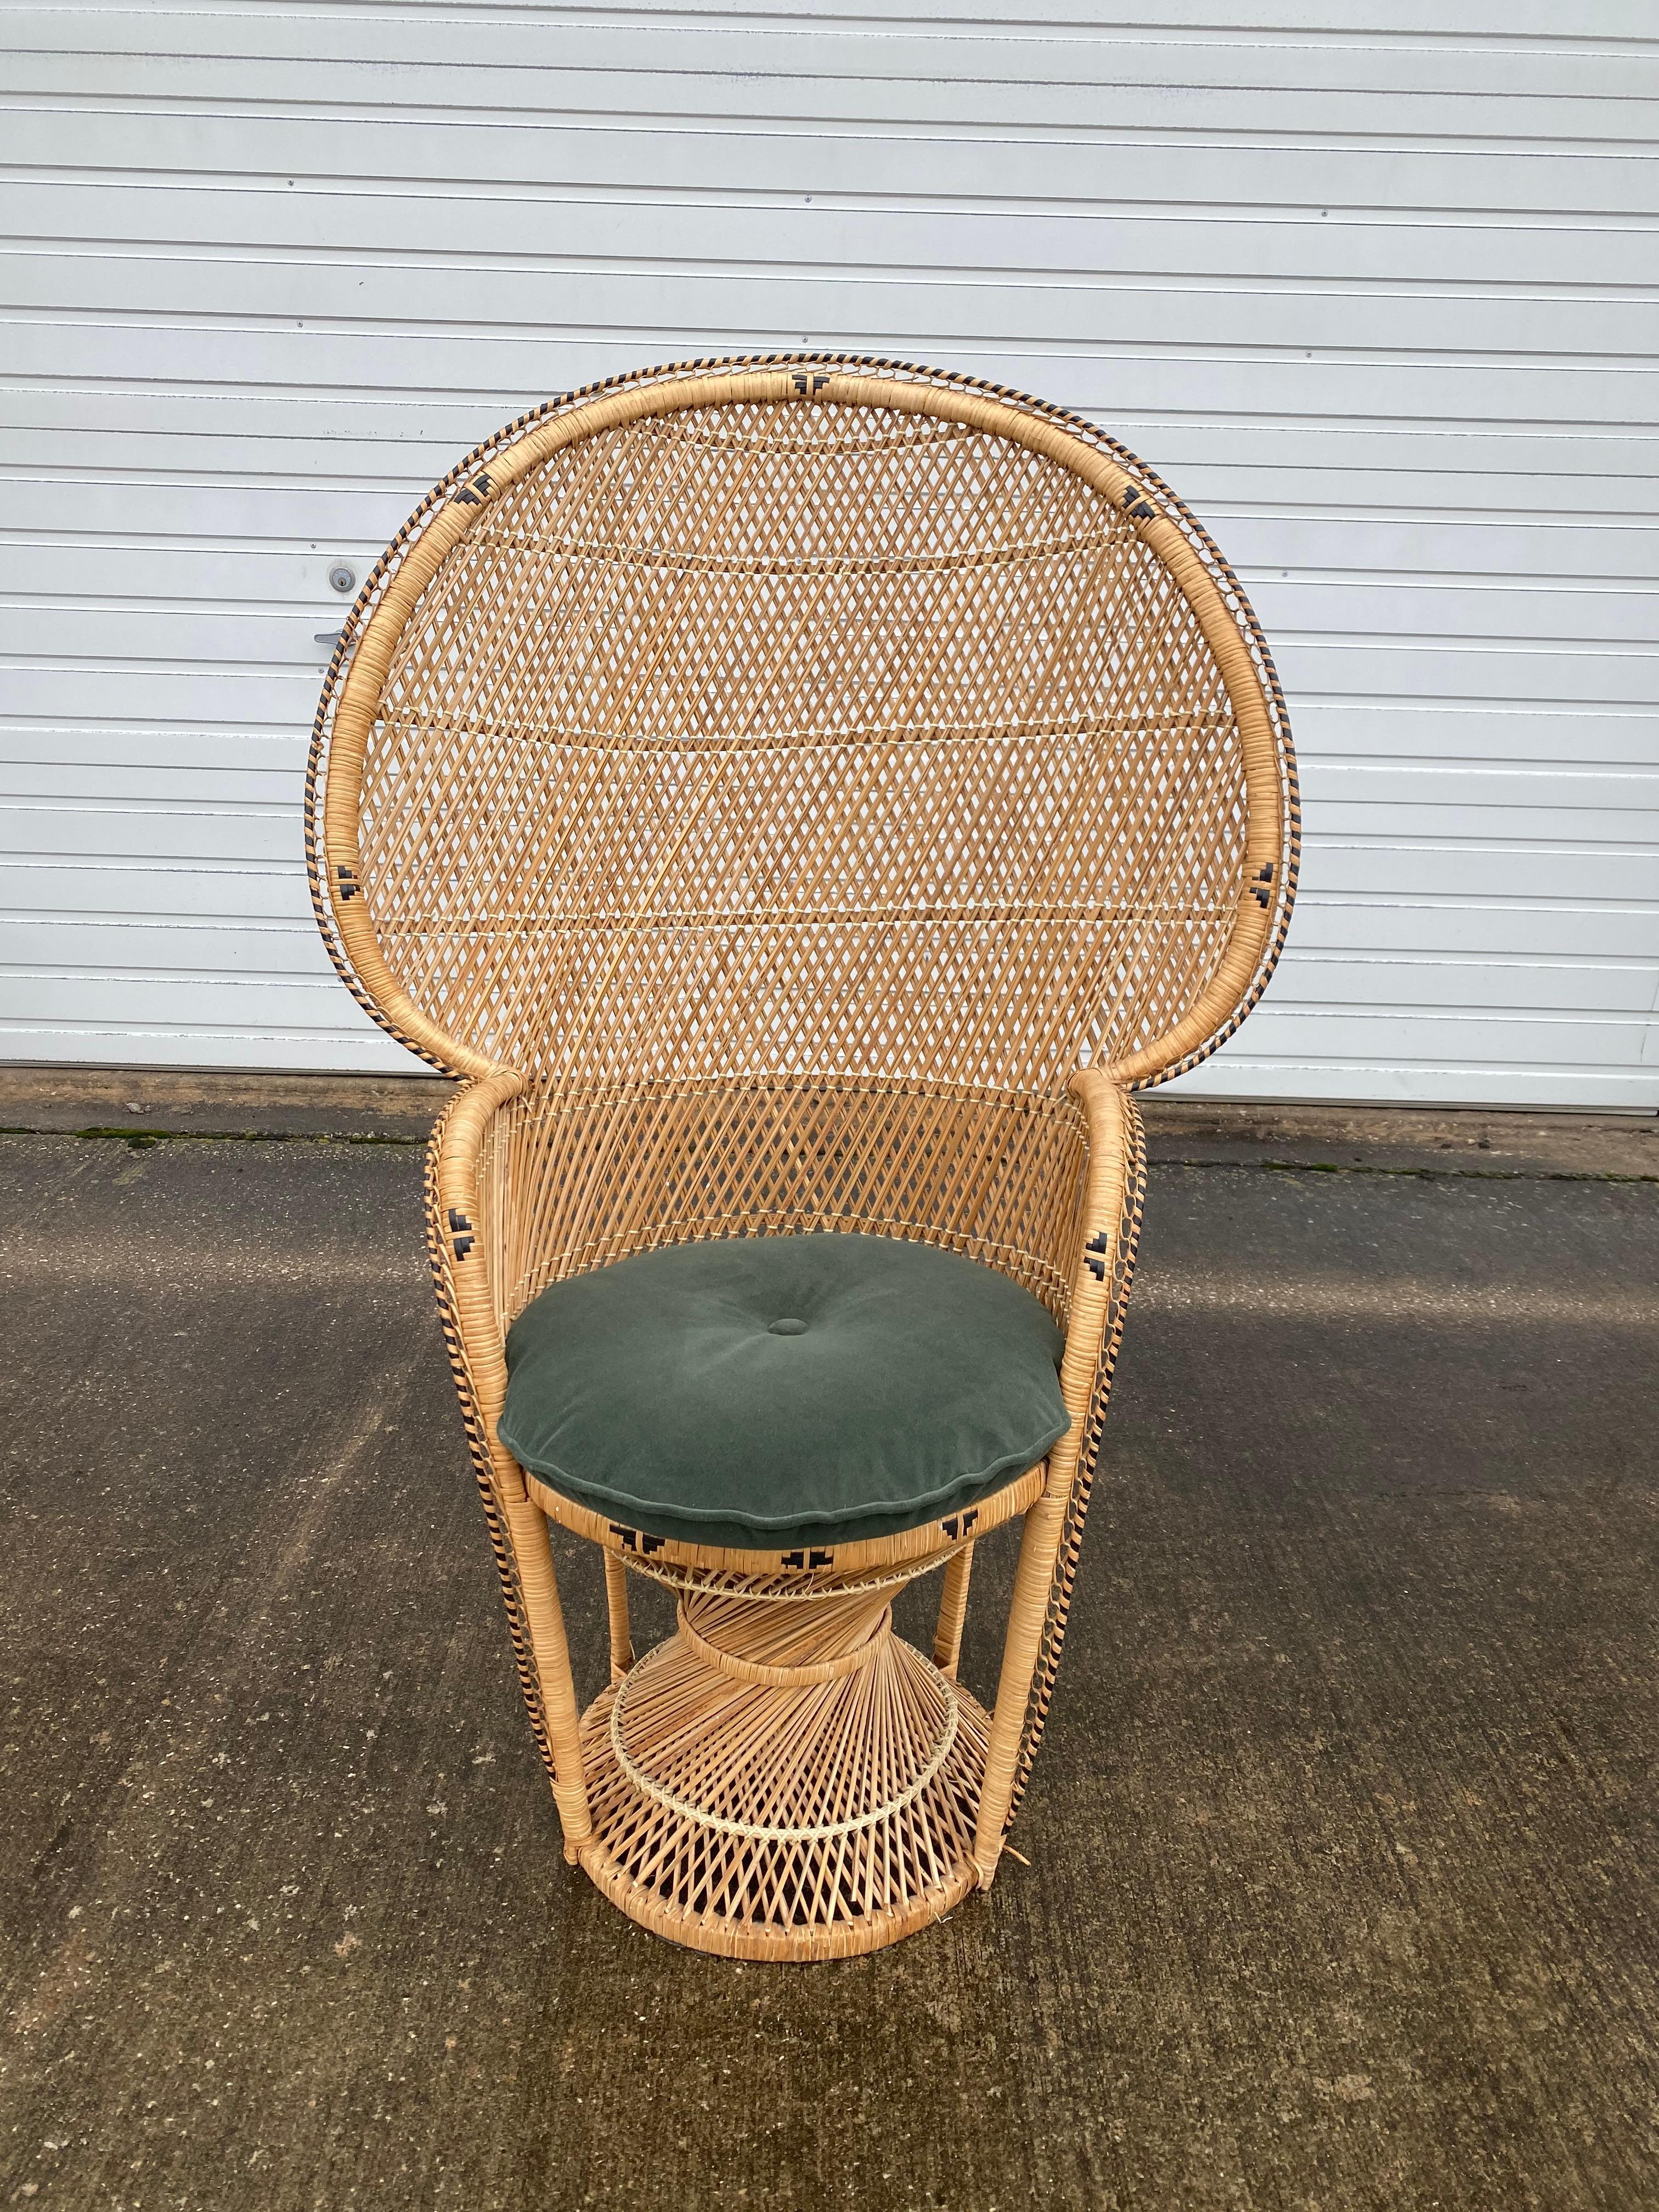 Late 20th Century Vintage Boho Chic Beige & Black Wicker Peacock Chair with New Cushion